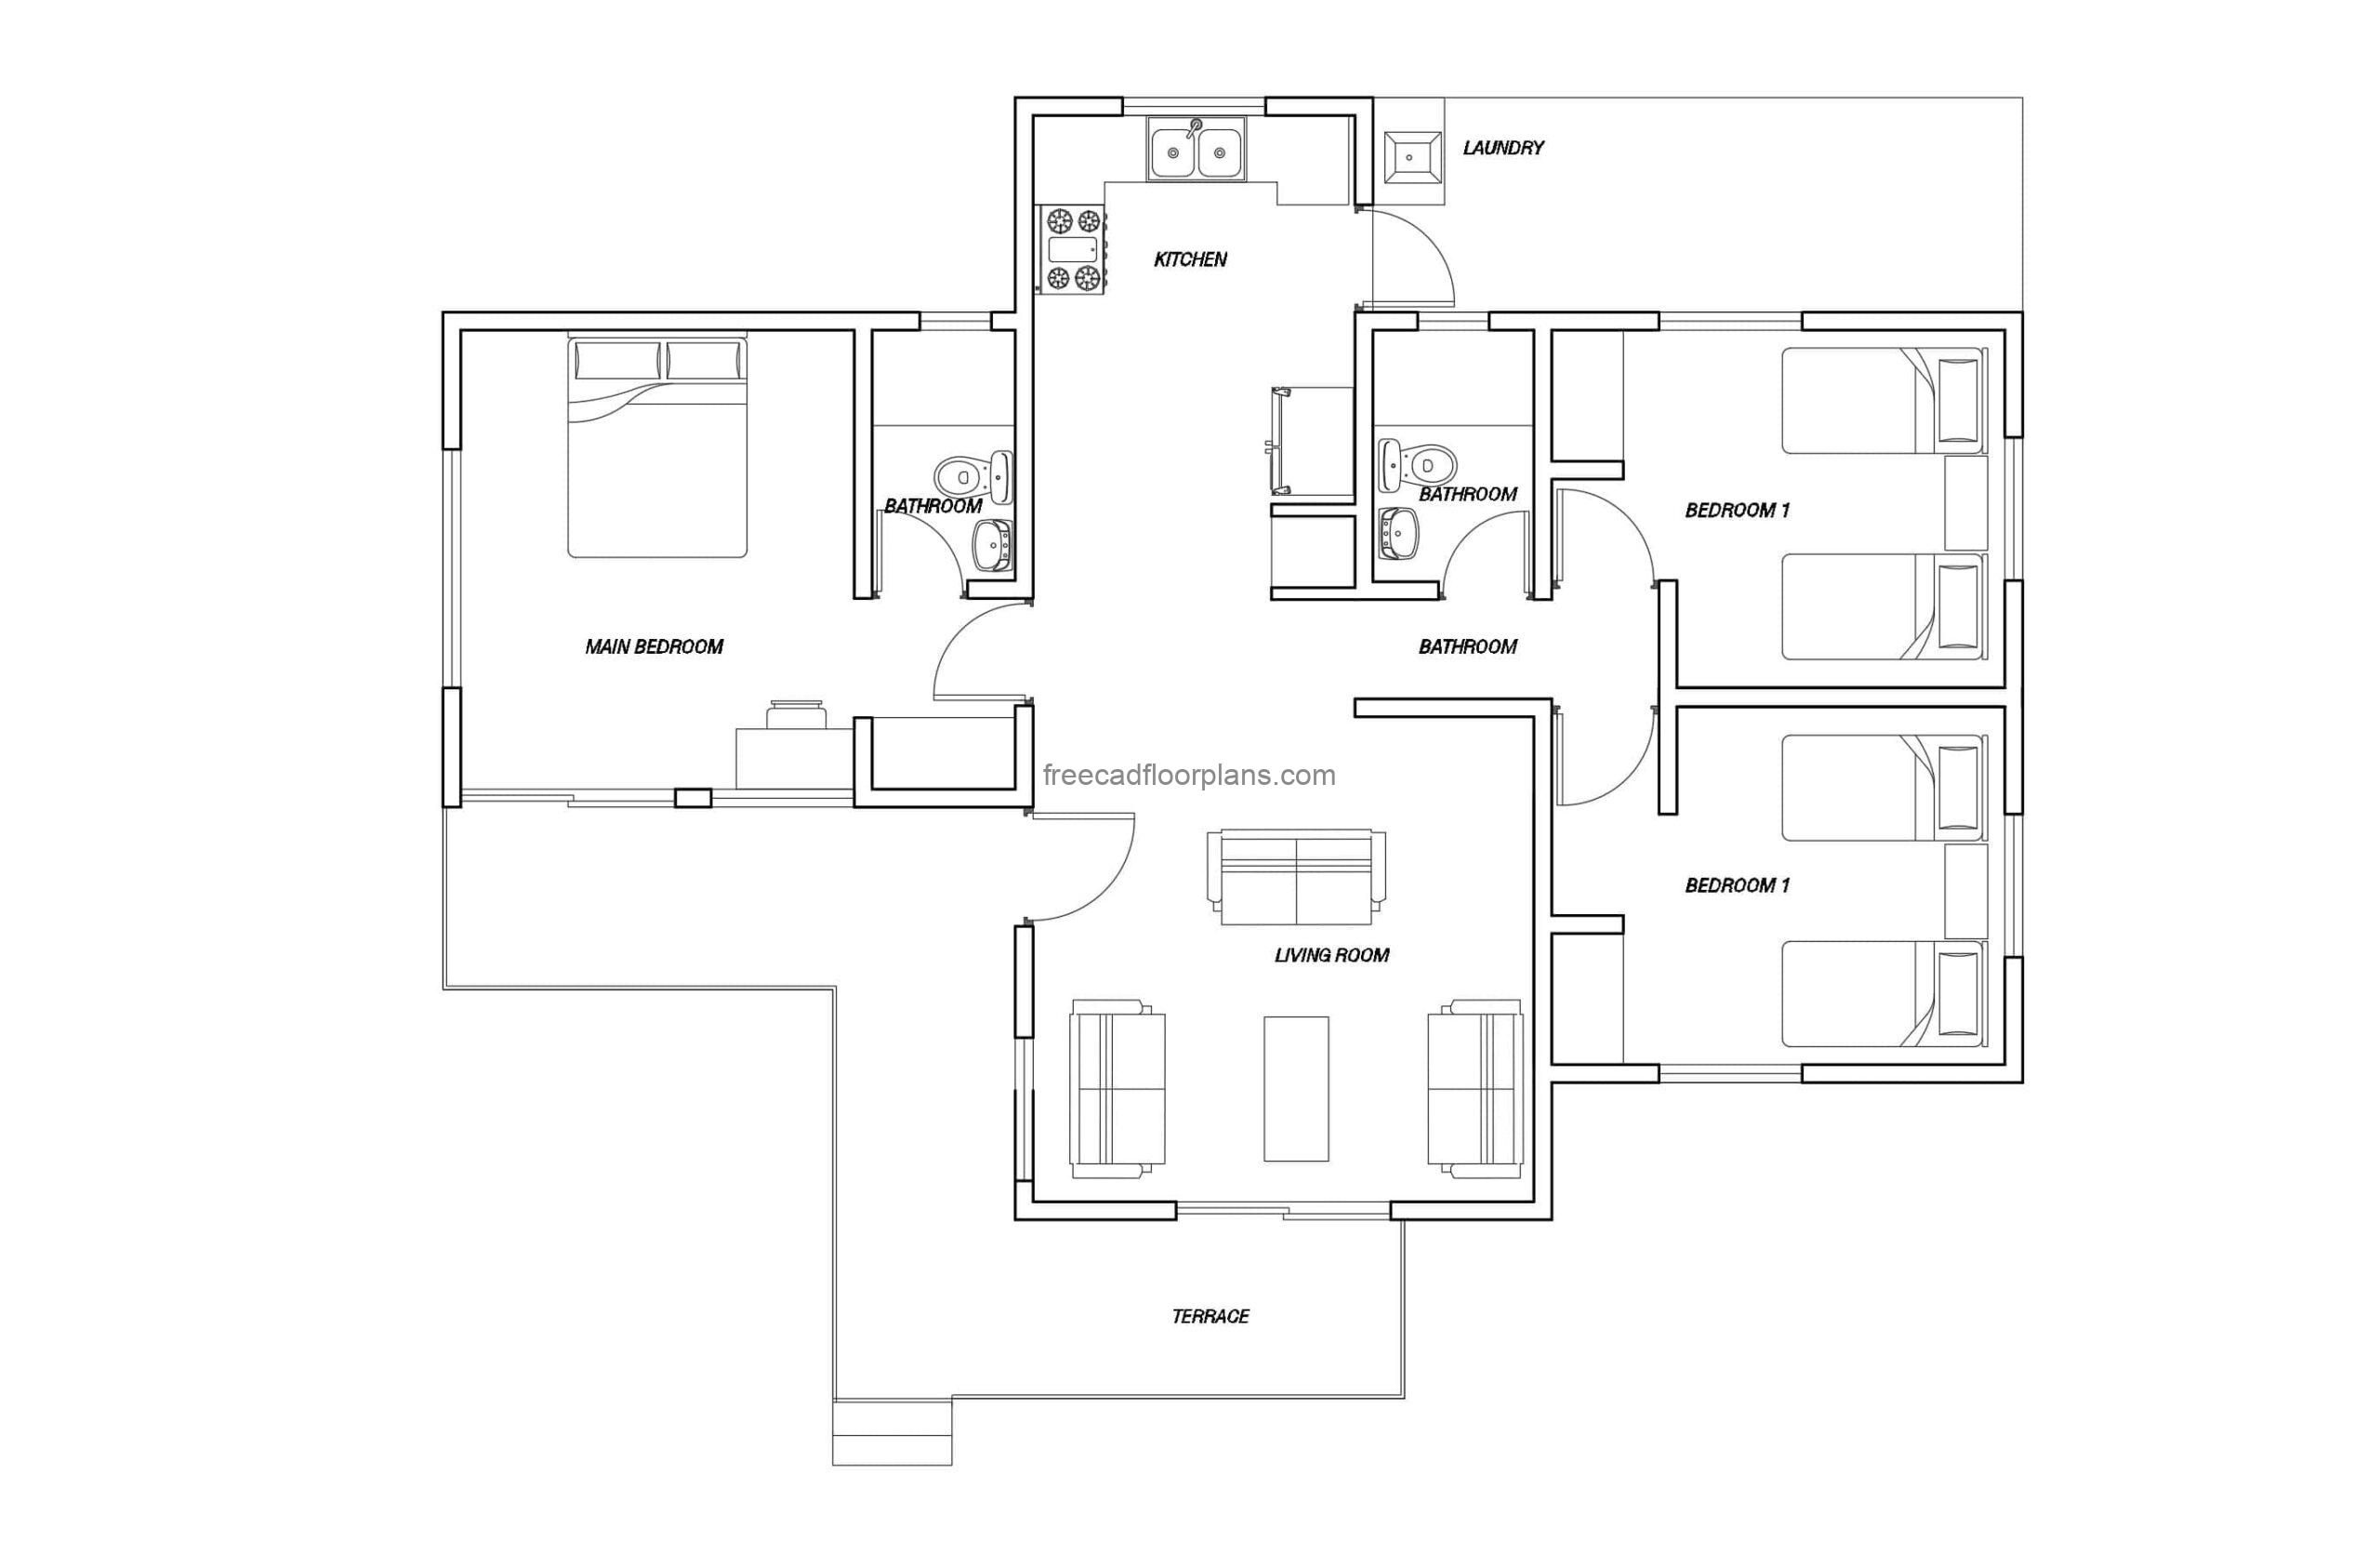 three room house plan in DWG CAD format, open floor plan, floor plan with dimensions for free download.